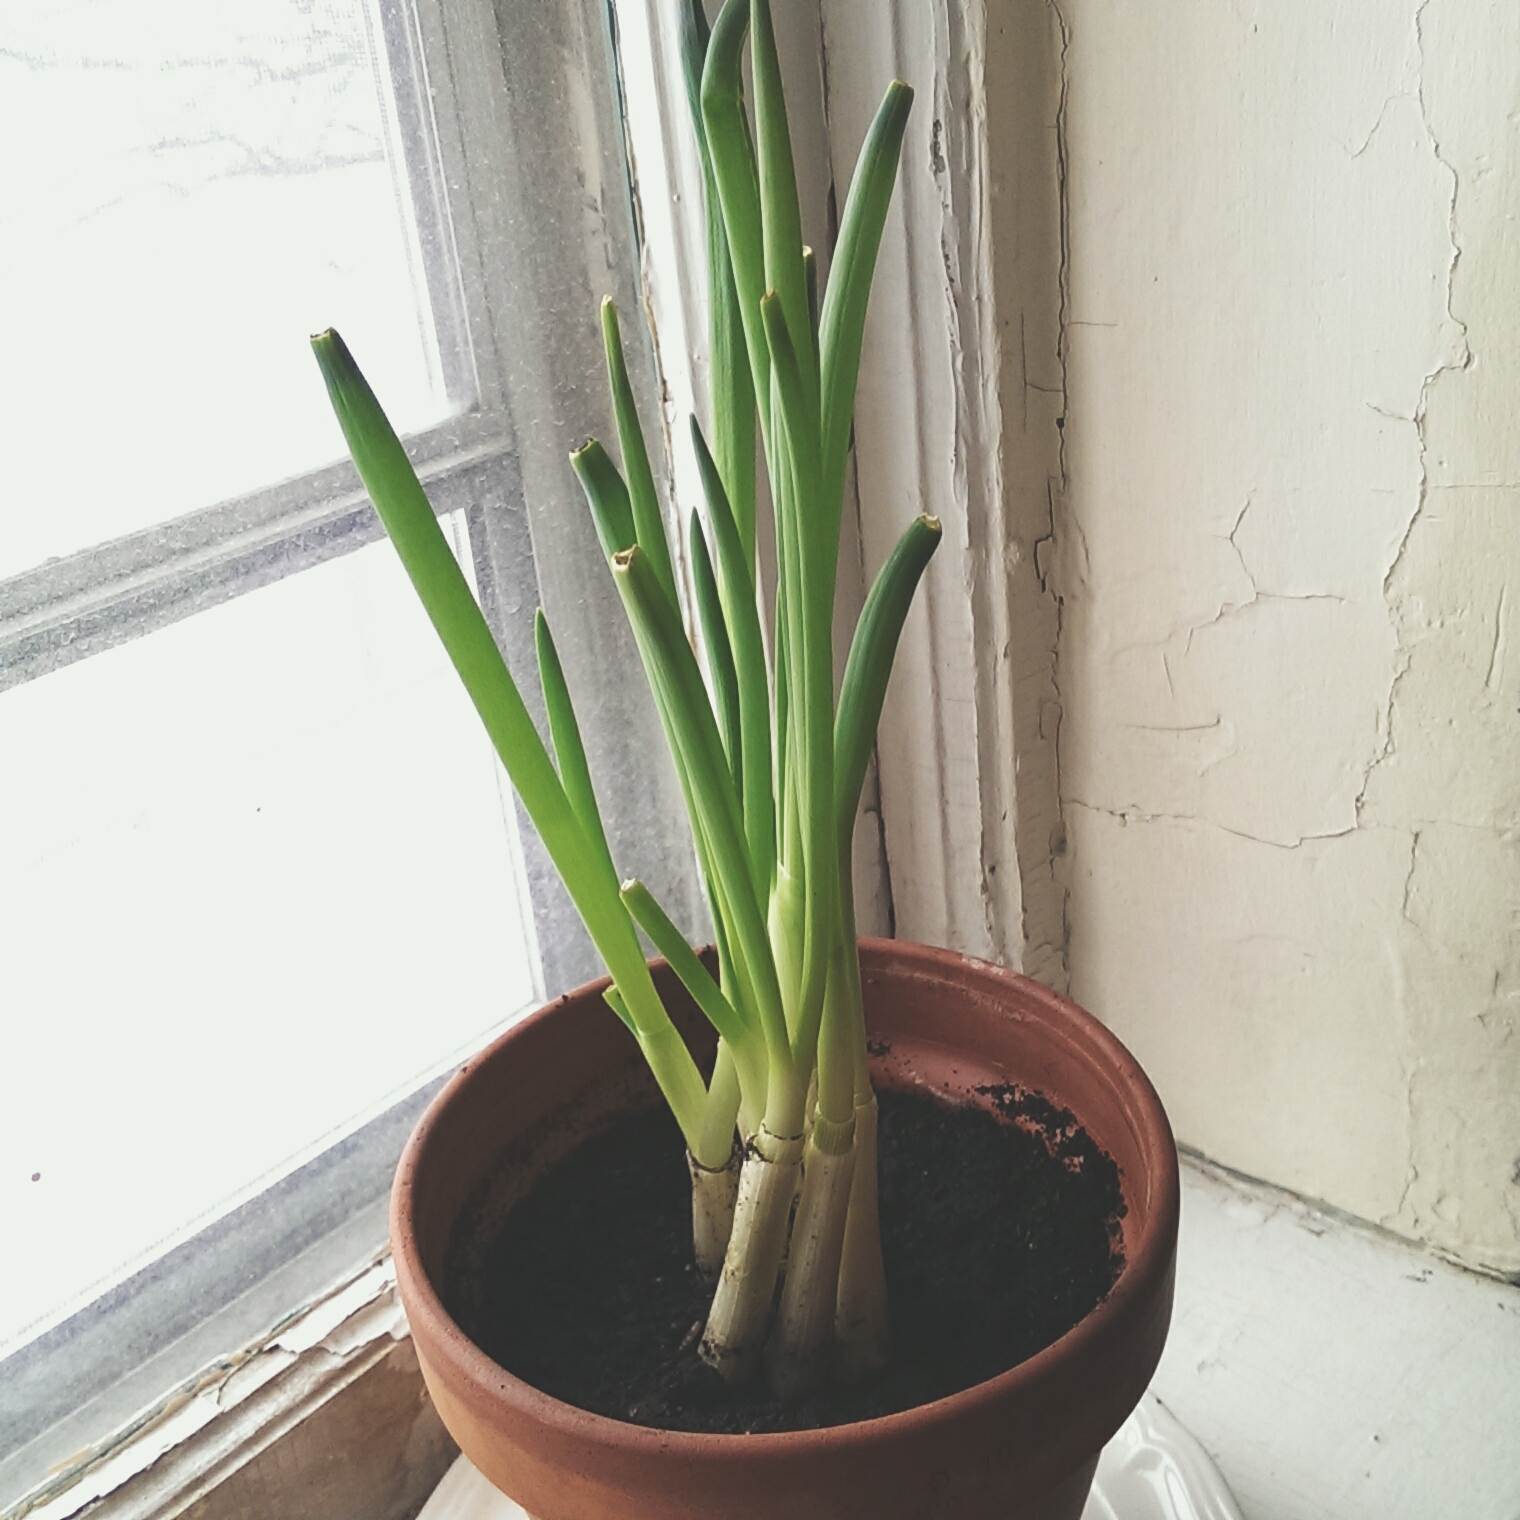 green onions all grown up